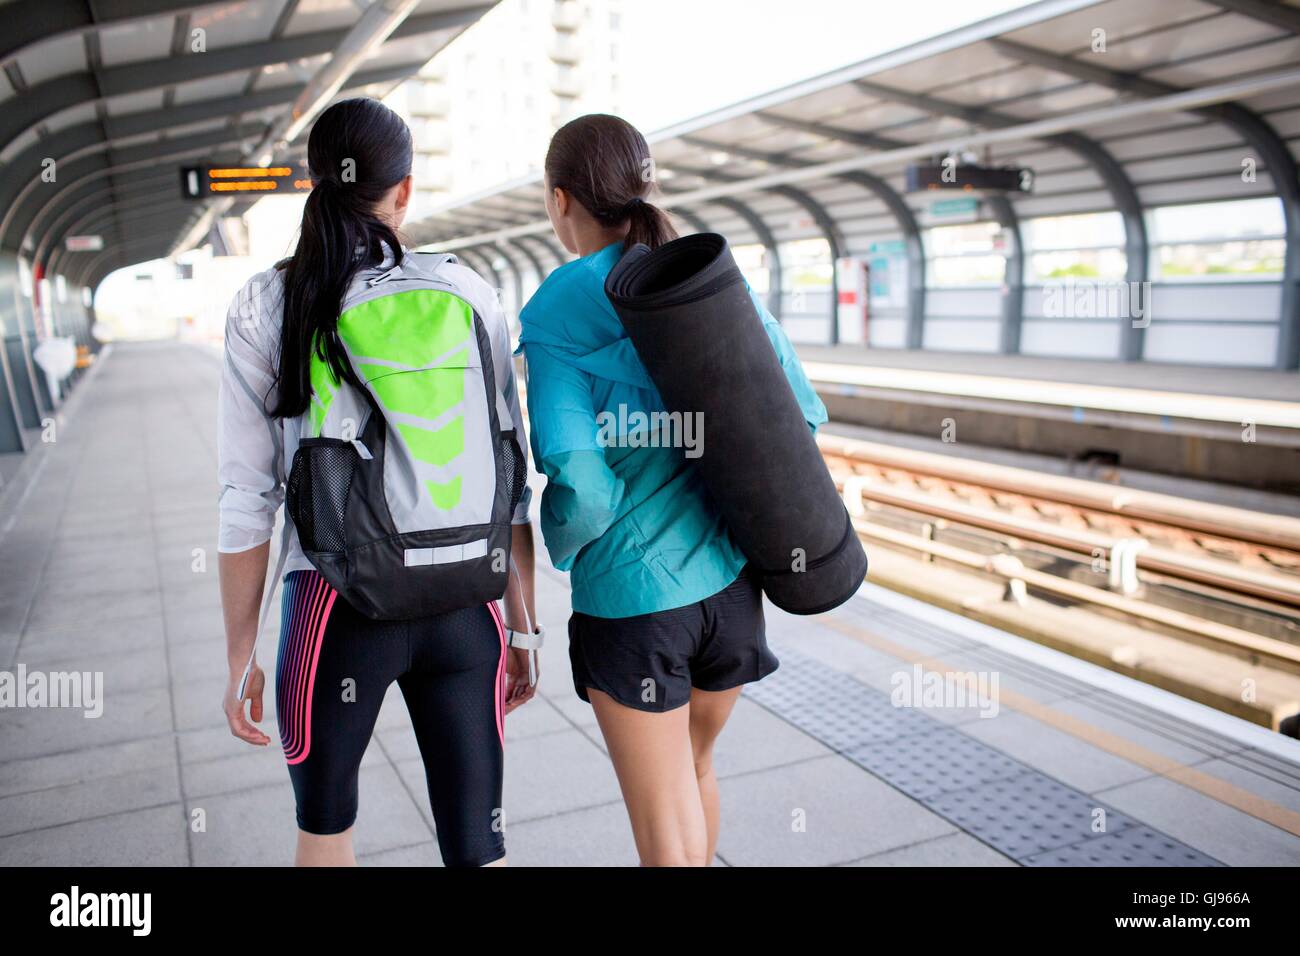 MODEL RELEASED. Two young women with sports equipment on railway platform. Stock Photo